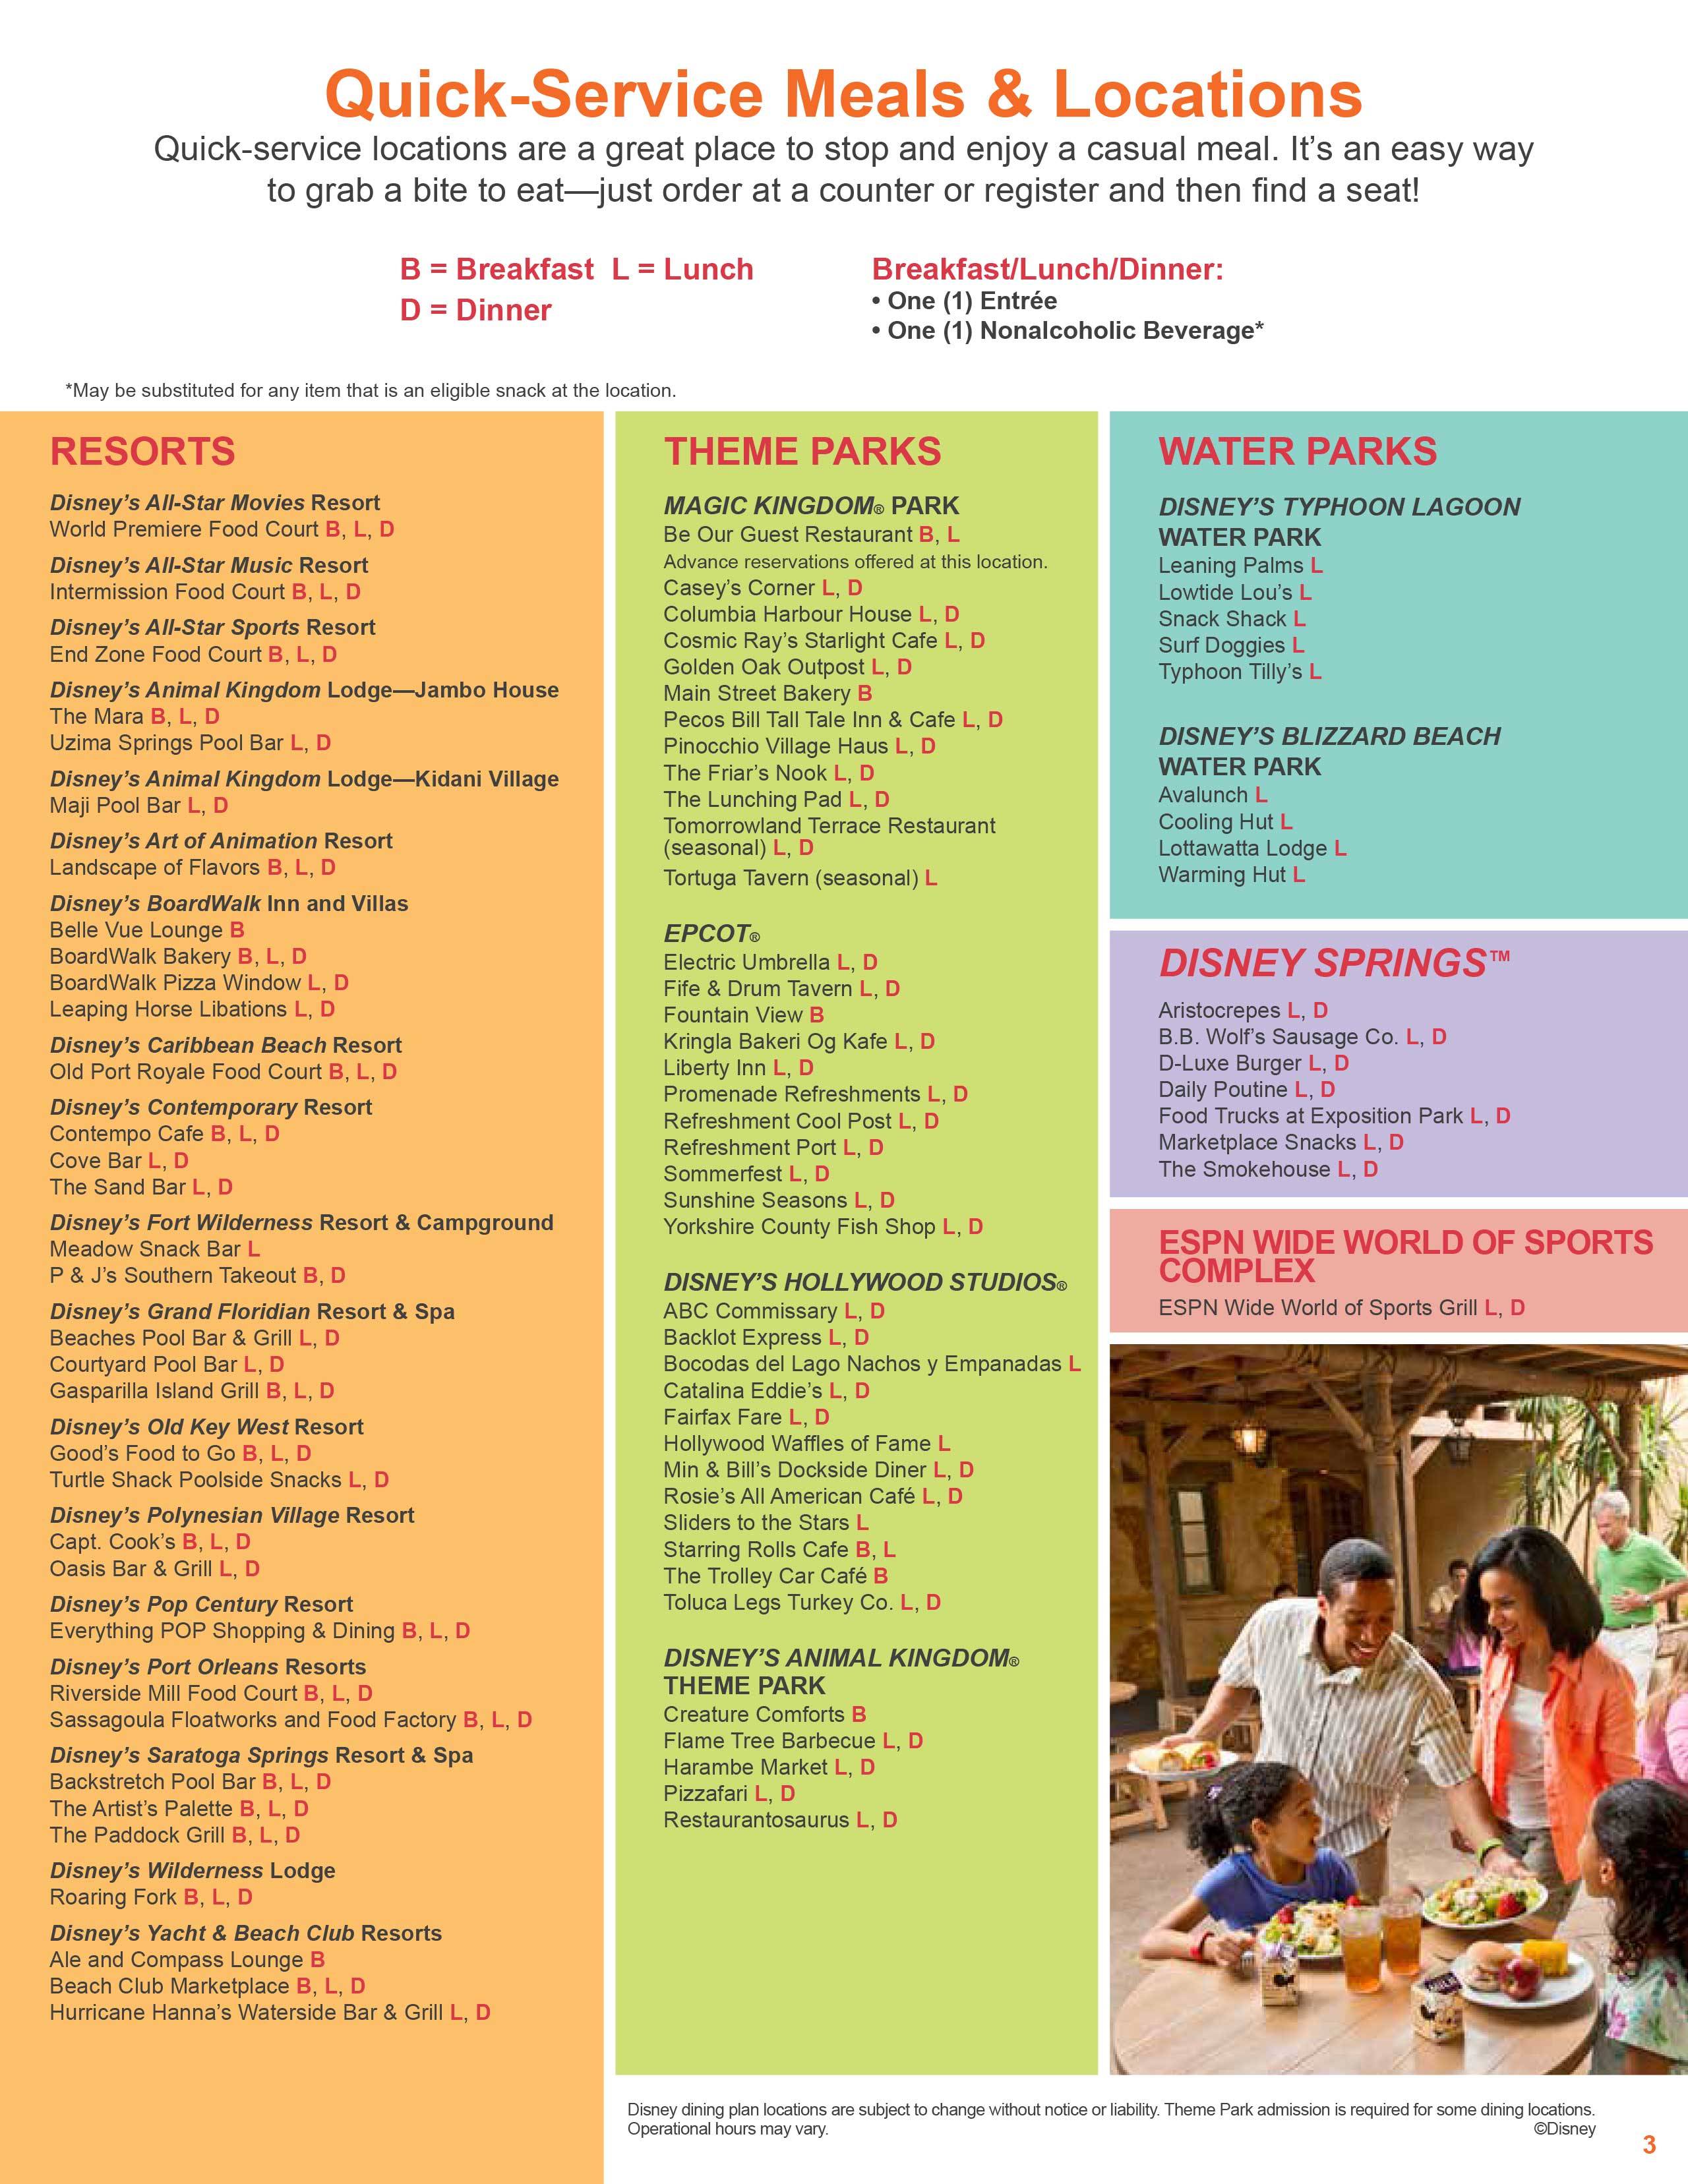 2017 Disney Quick Service Dining Plan brochure - Page 3